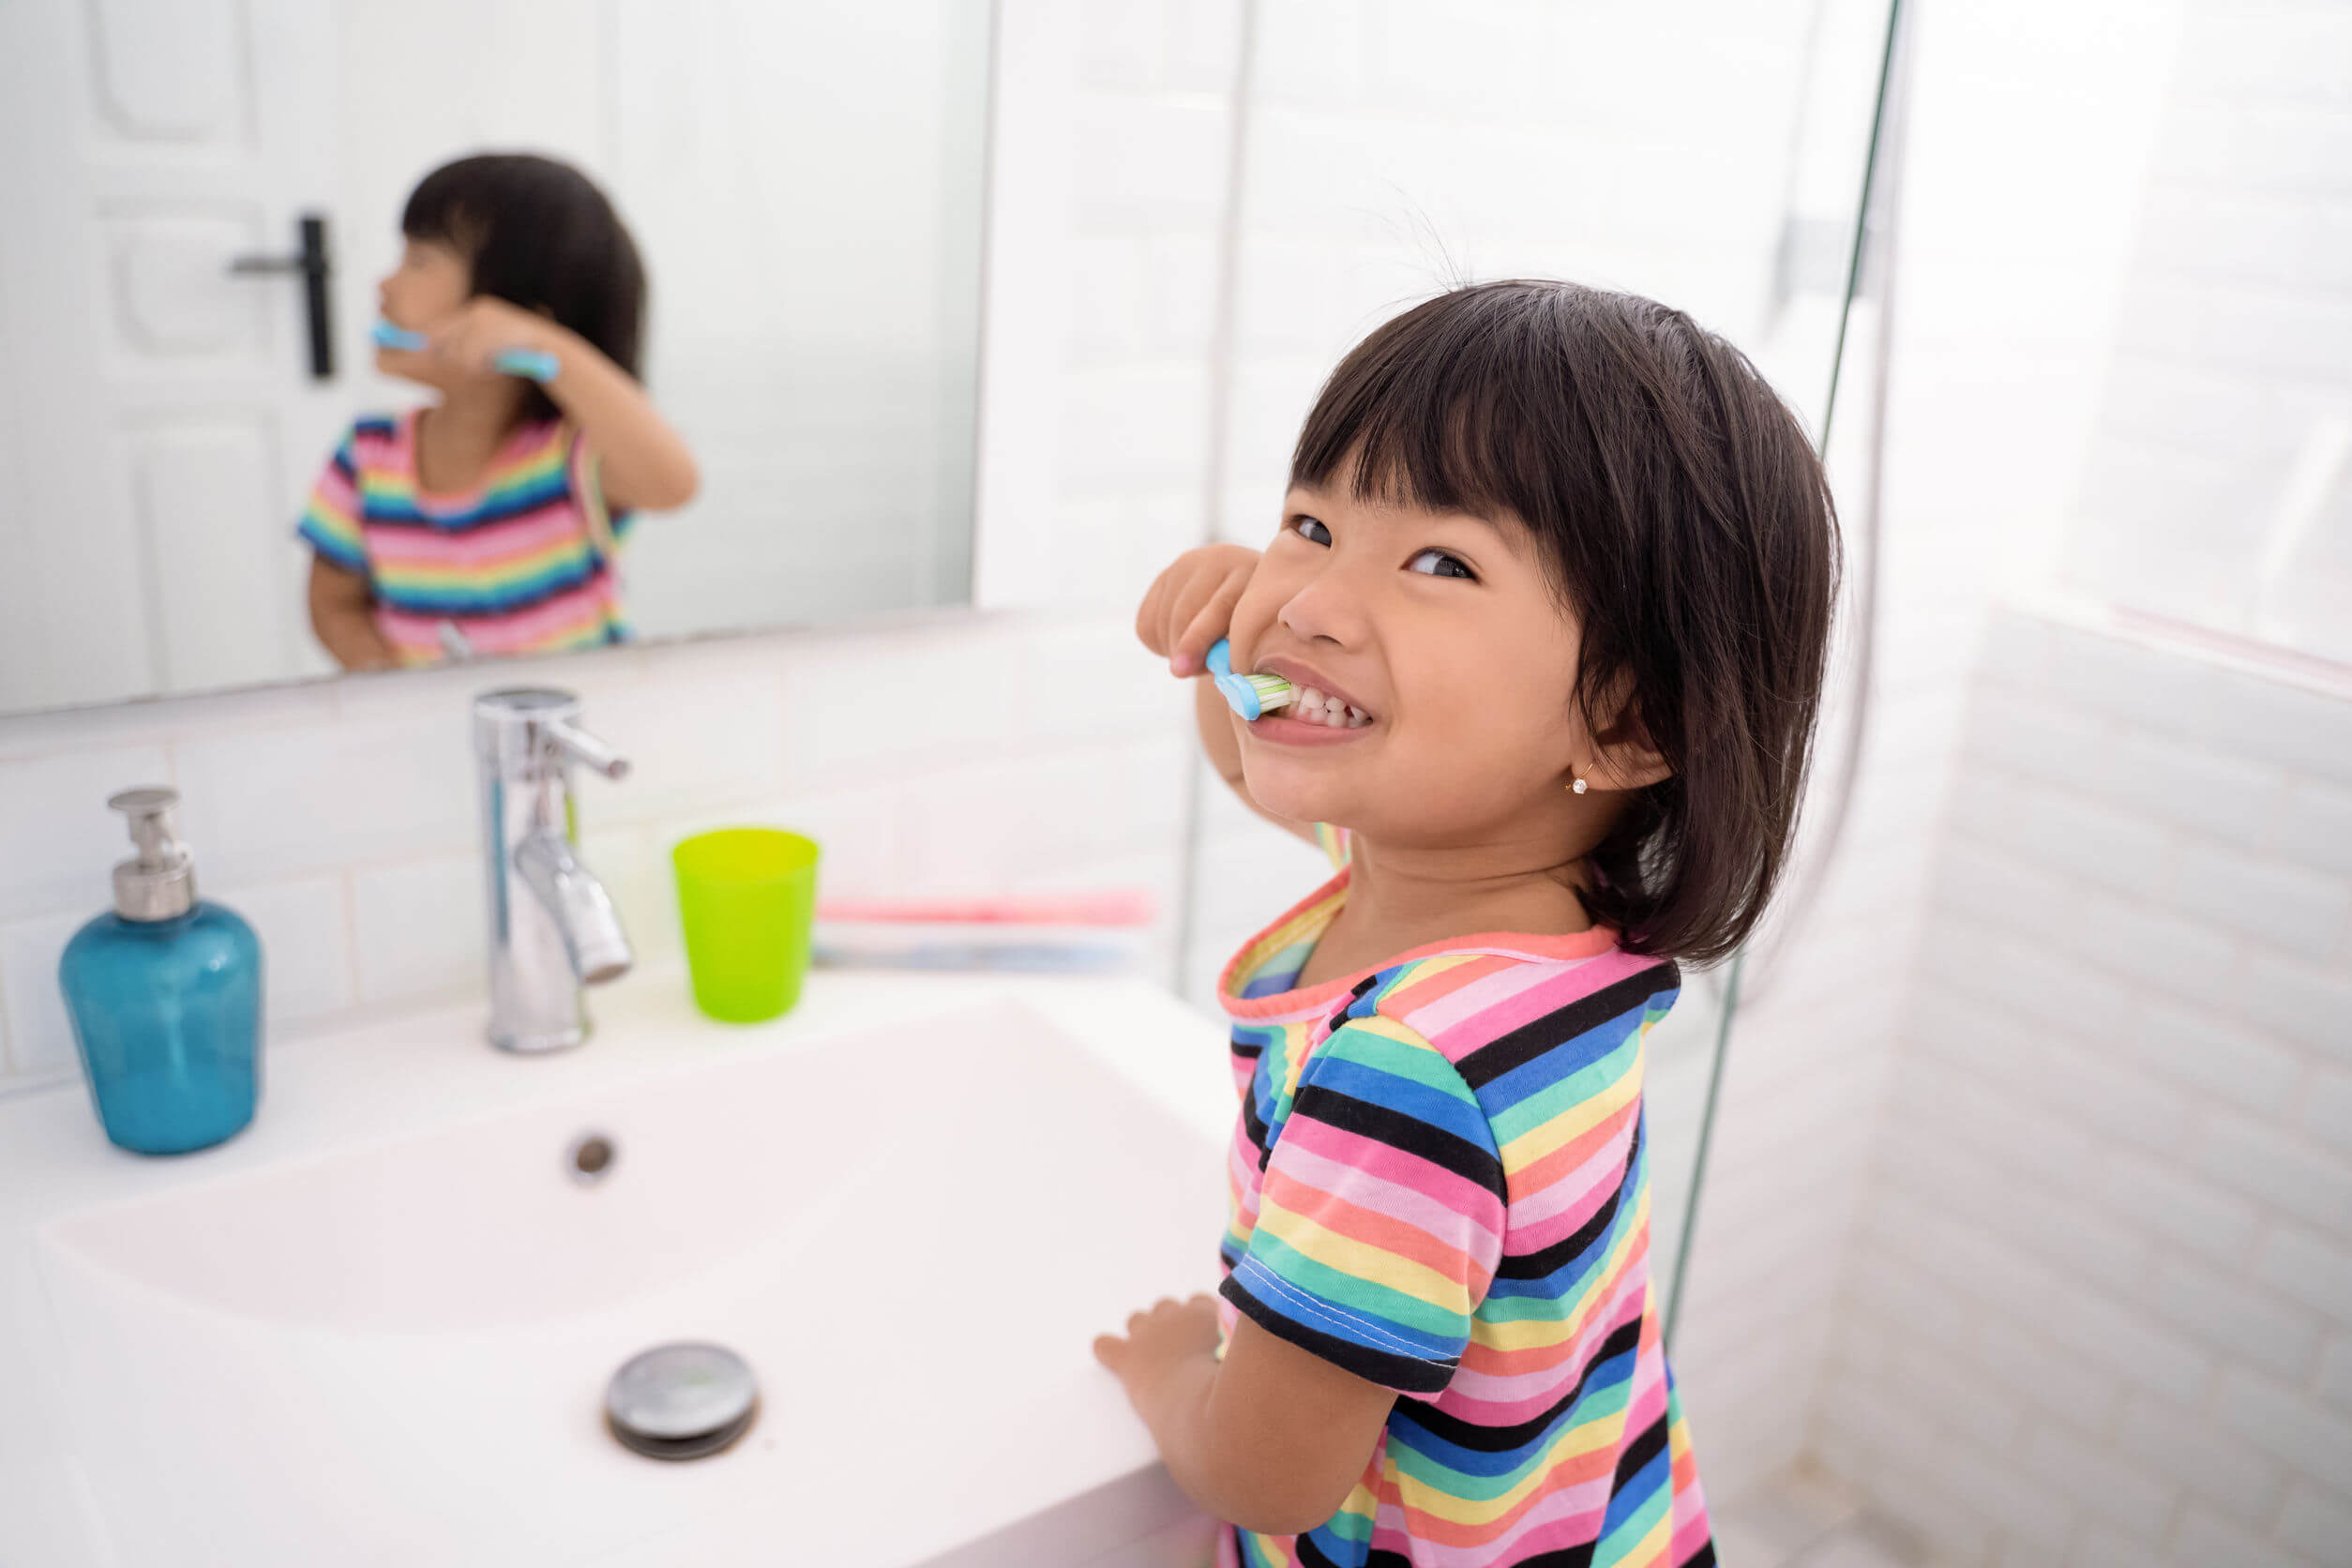 A toddler girl brushing her teeth by the sink.